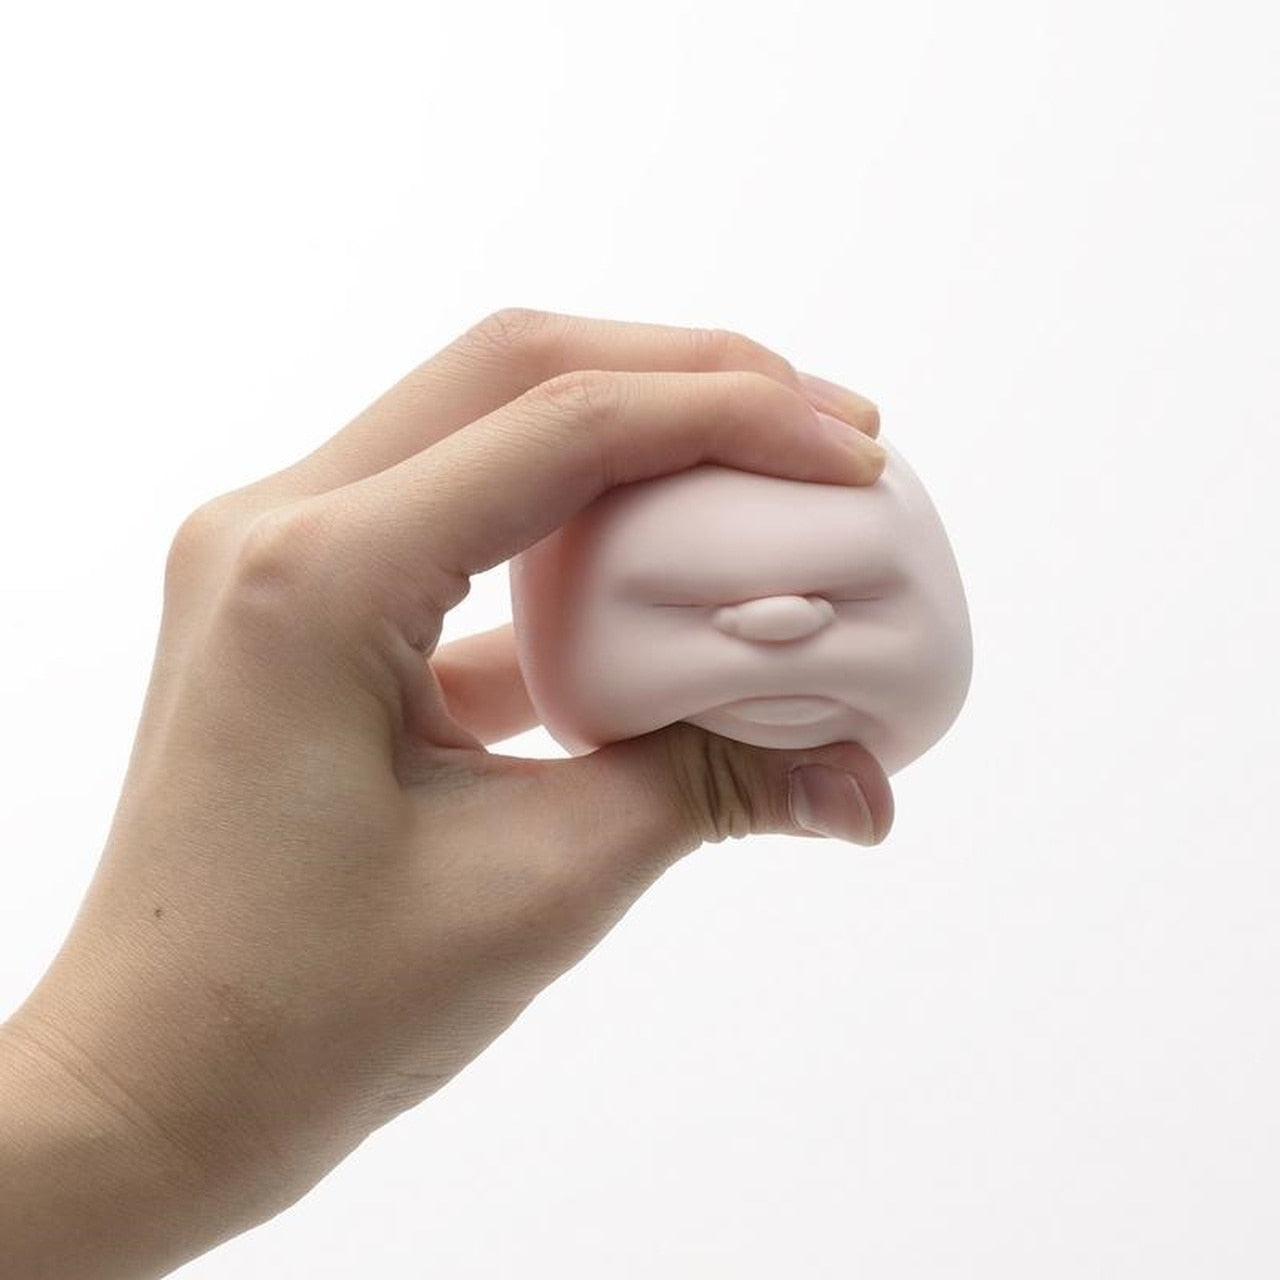 FACE OF THE MOON STRESS BALL